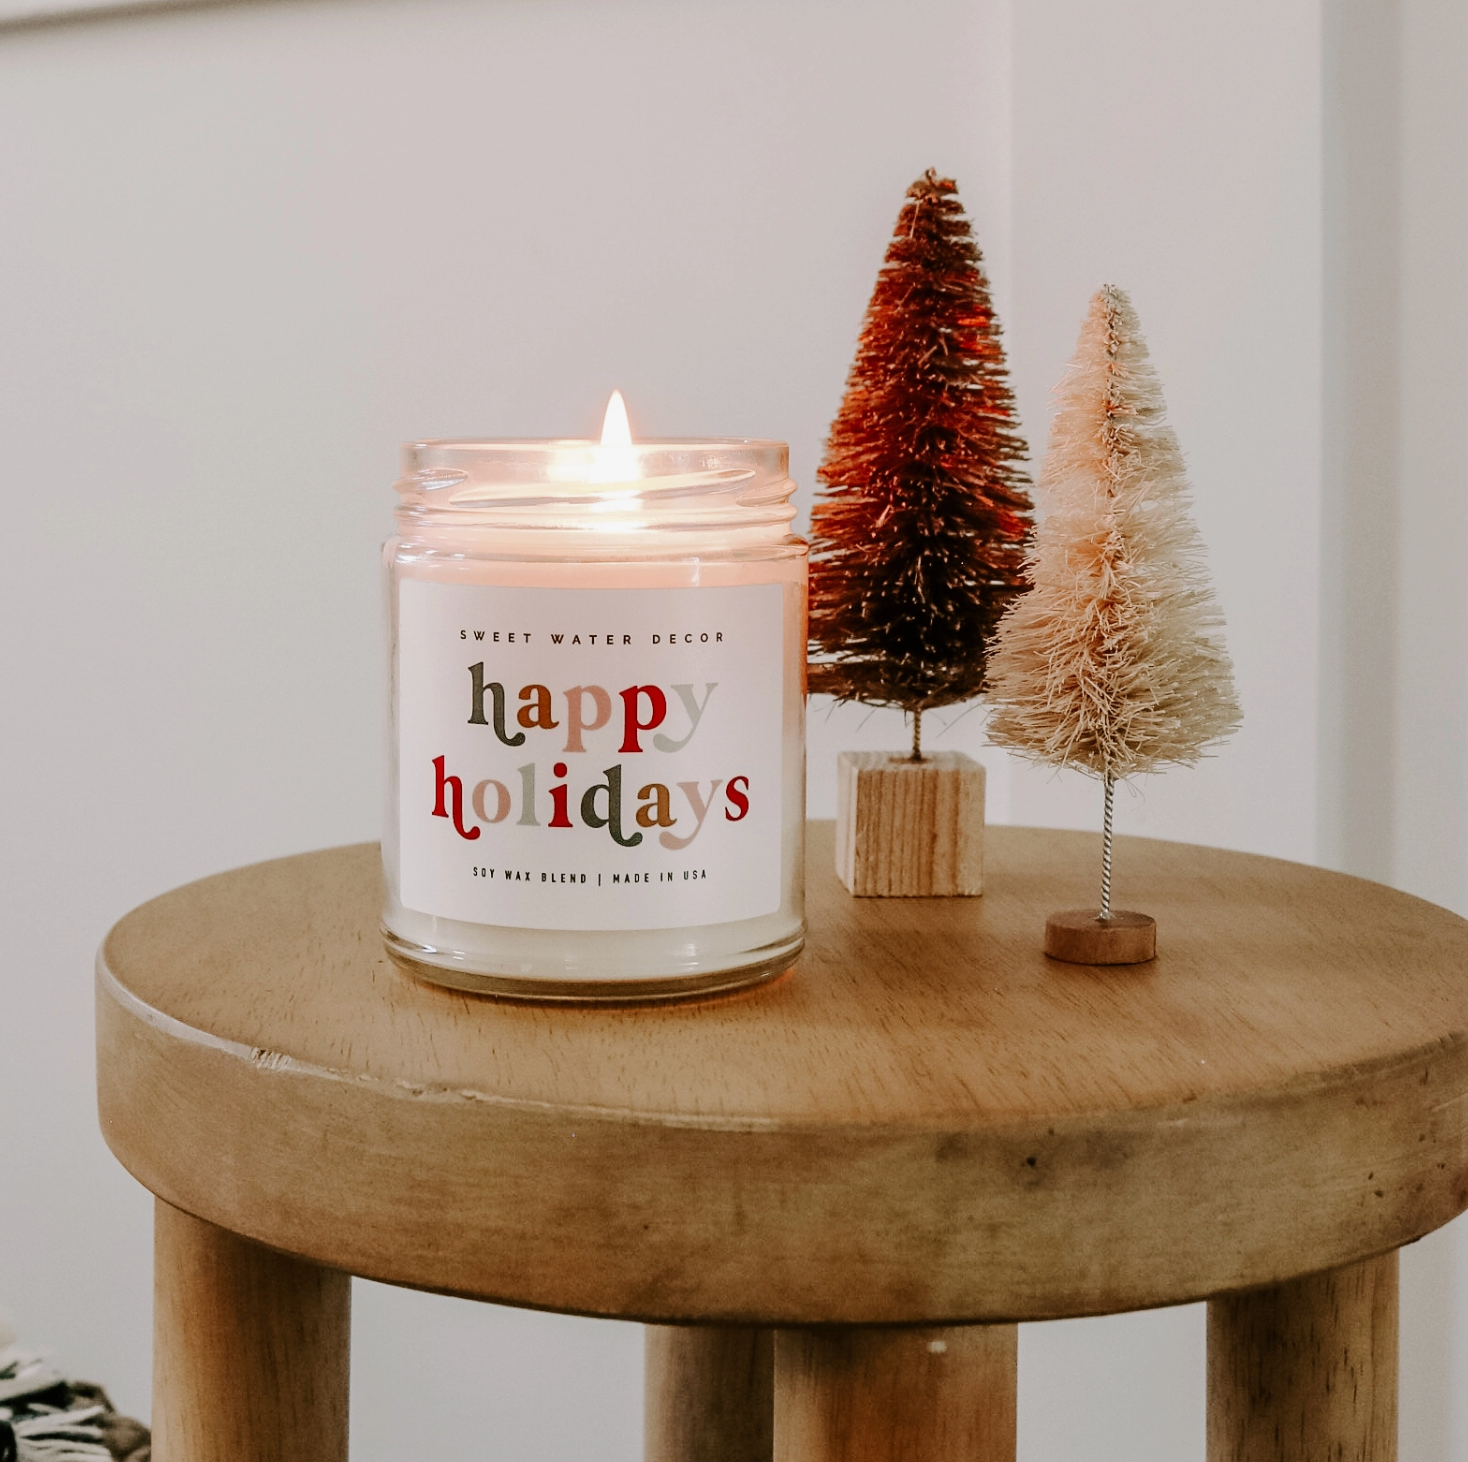 Happy Holidays Candle